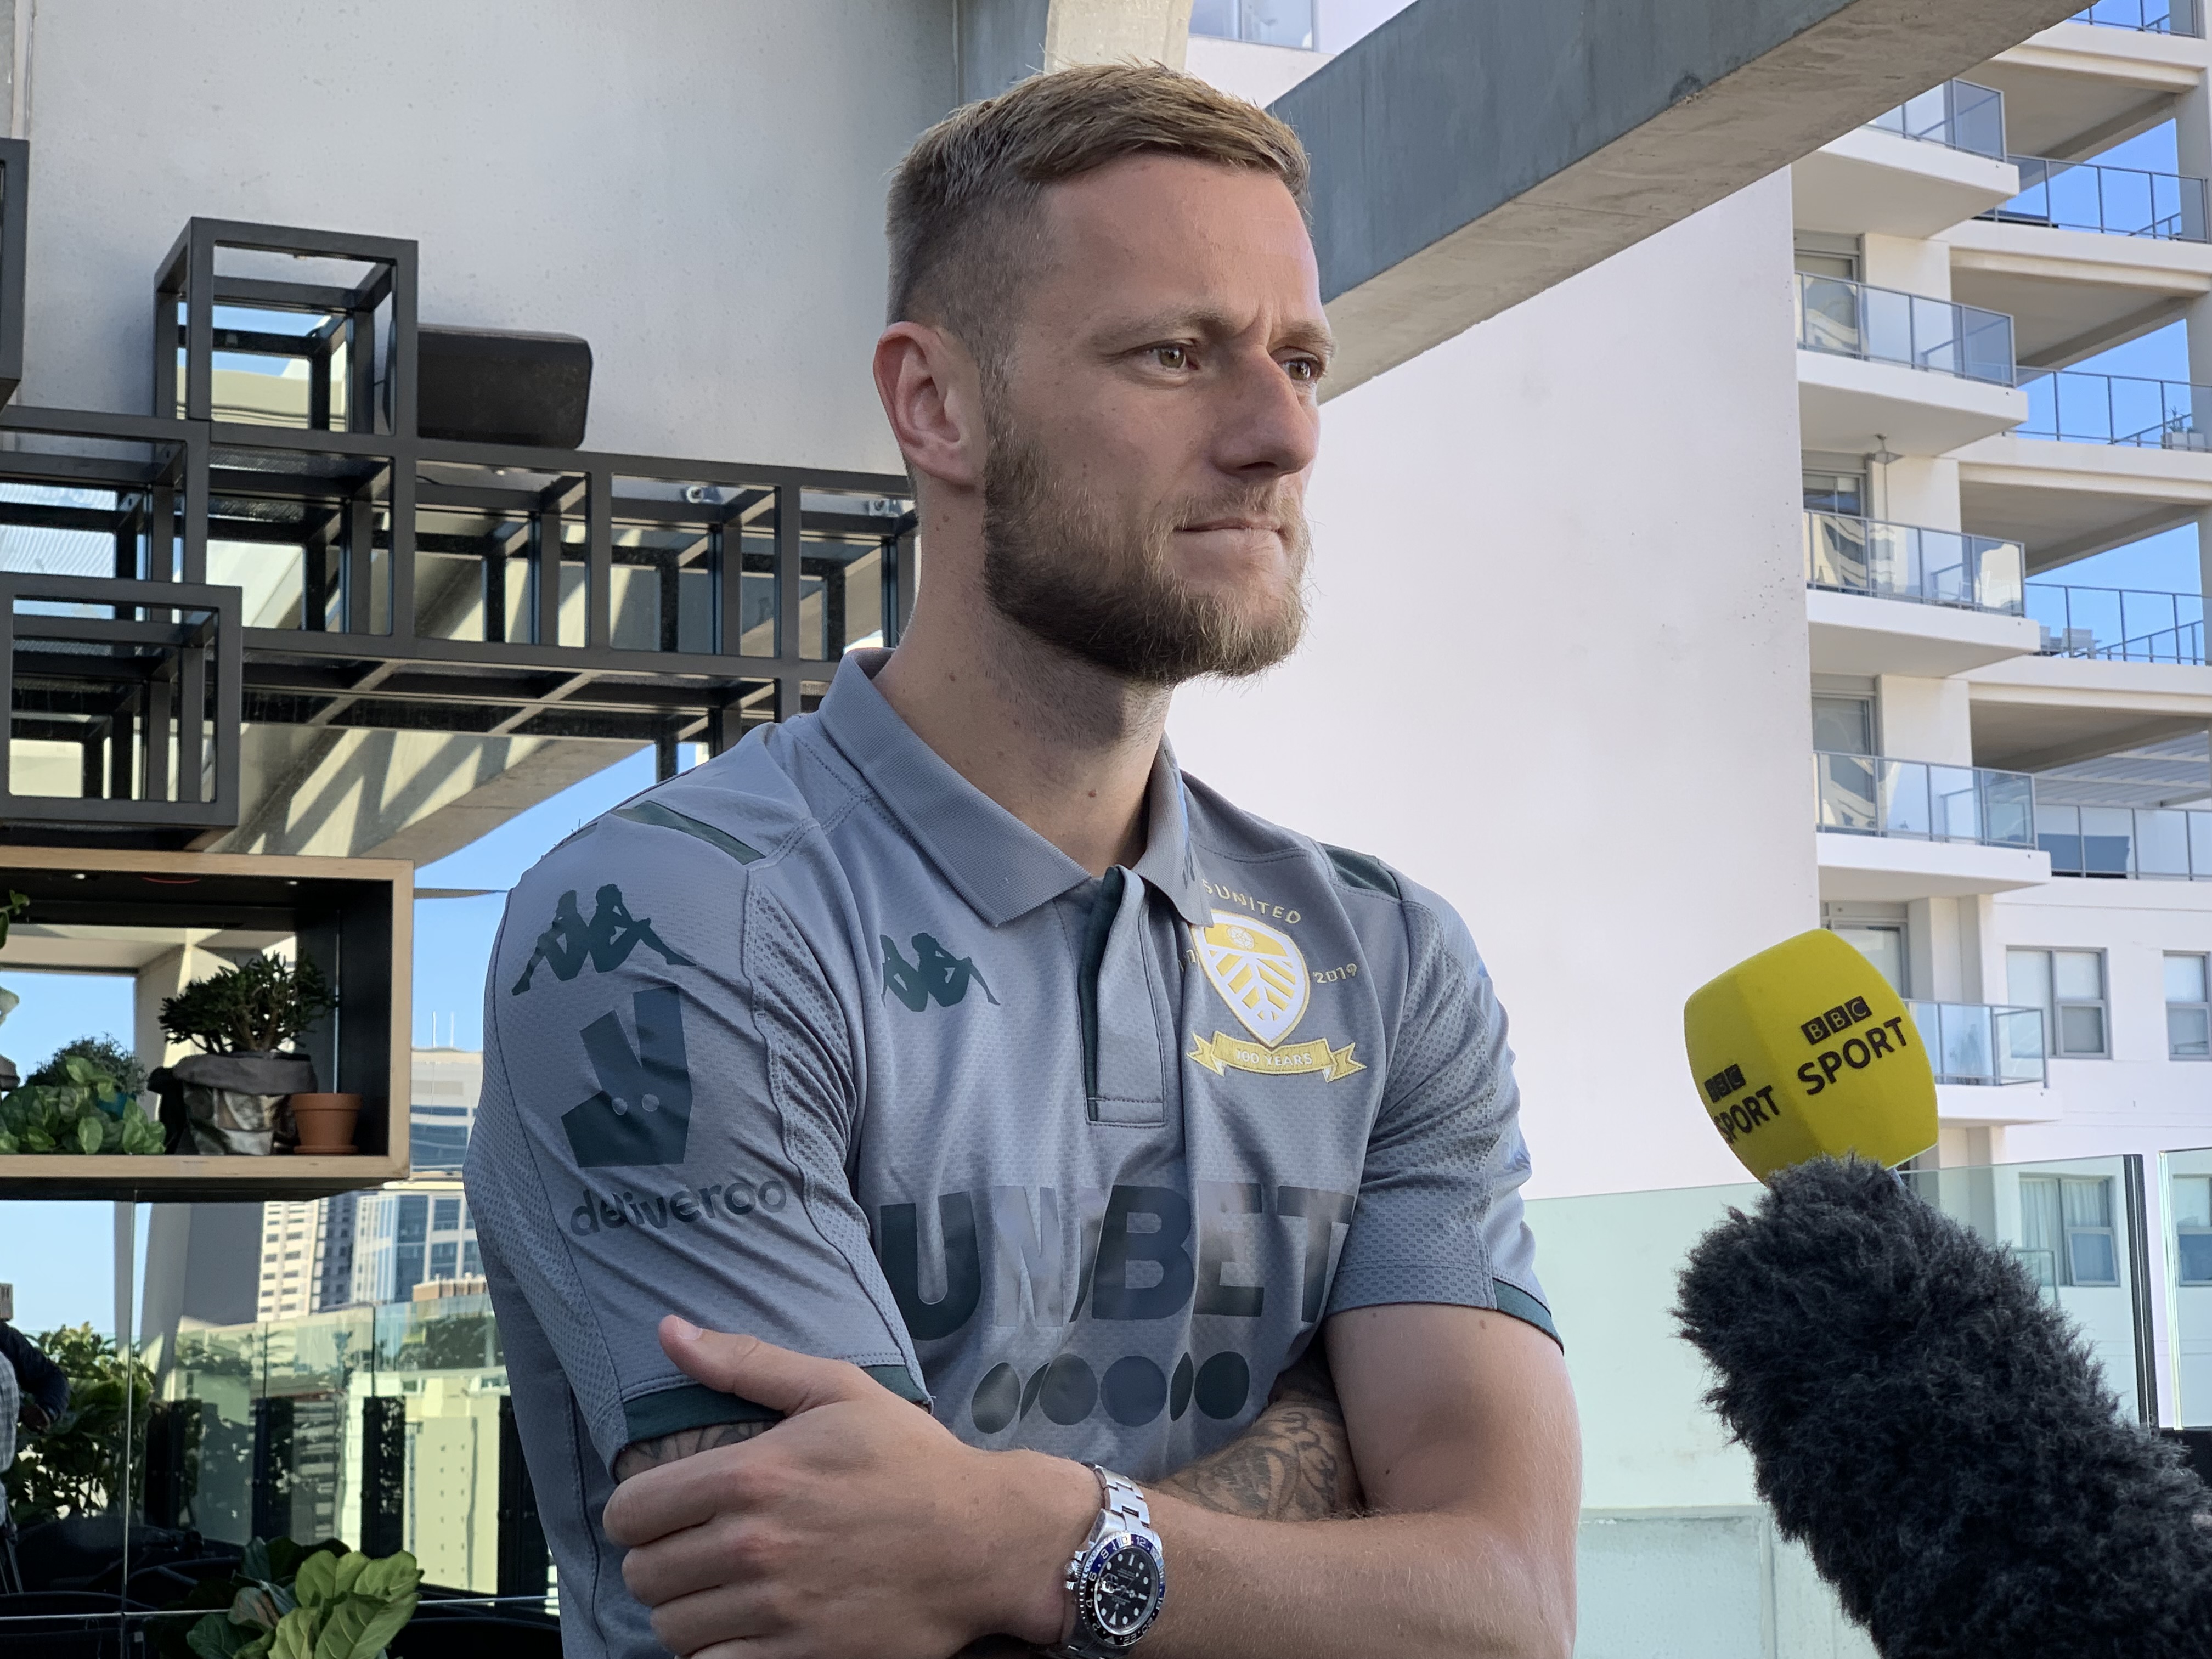 Leeds captain Liam Cooper previews the Manchester United friendly